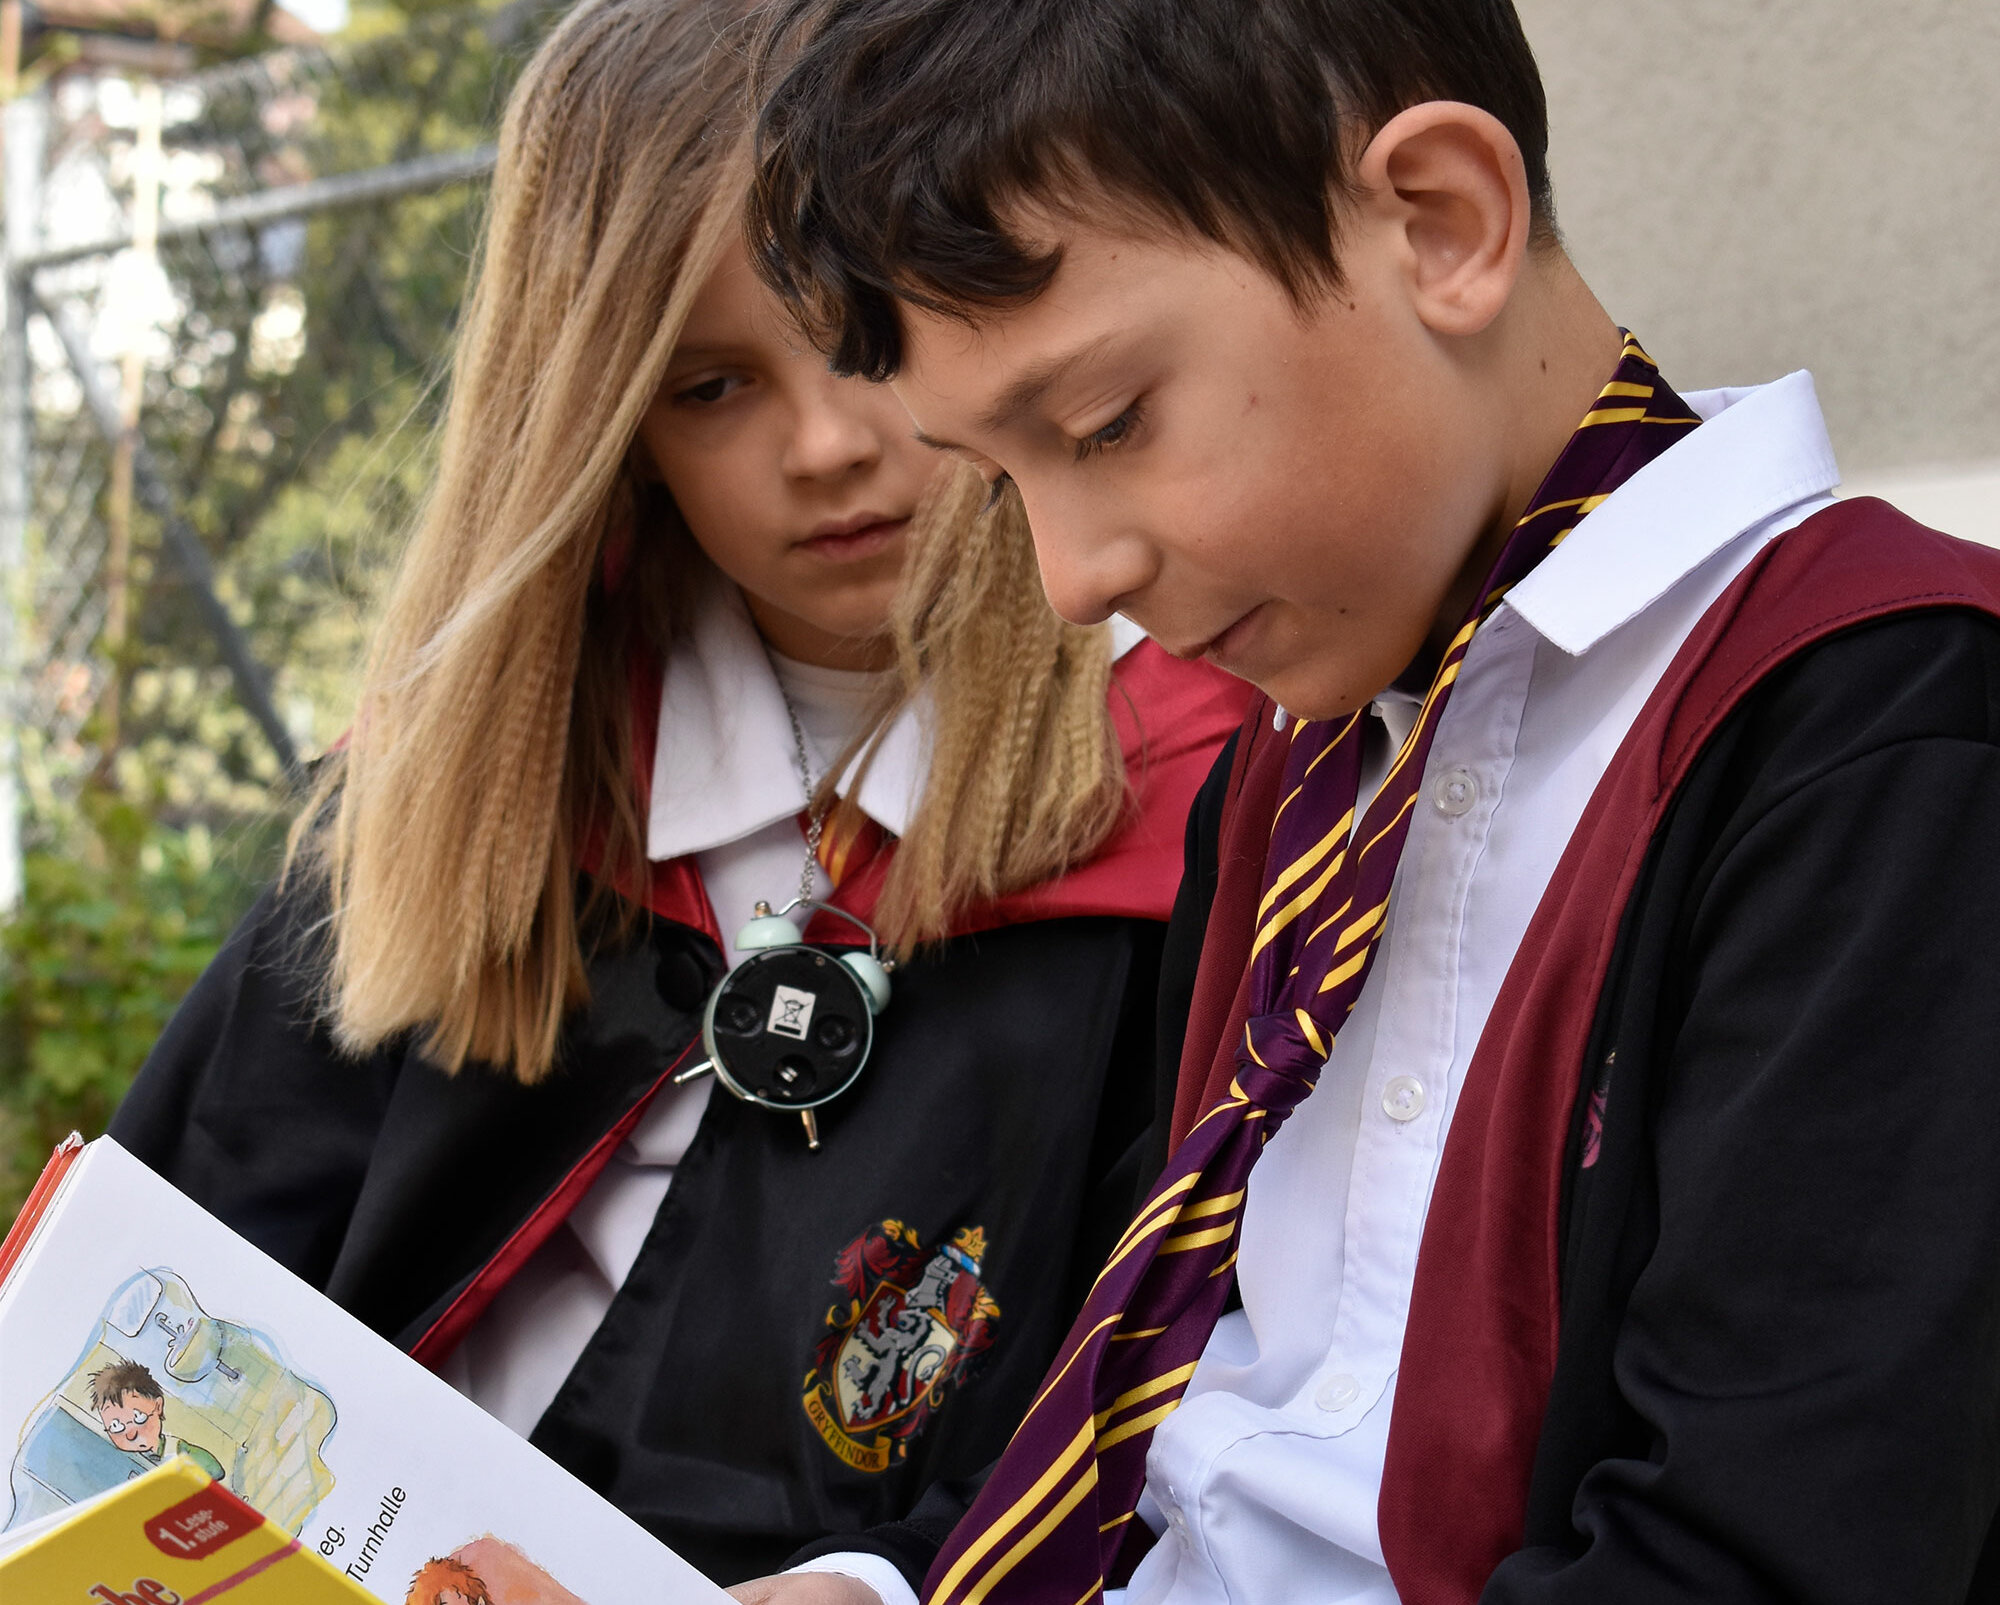 A boy and a girl are dressed up as Harry Potter and read a book together on World Book Day.	